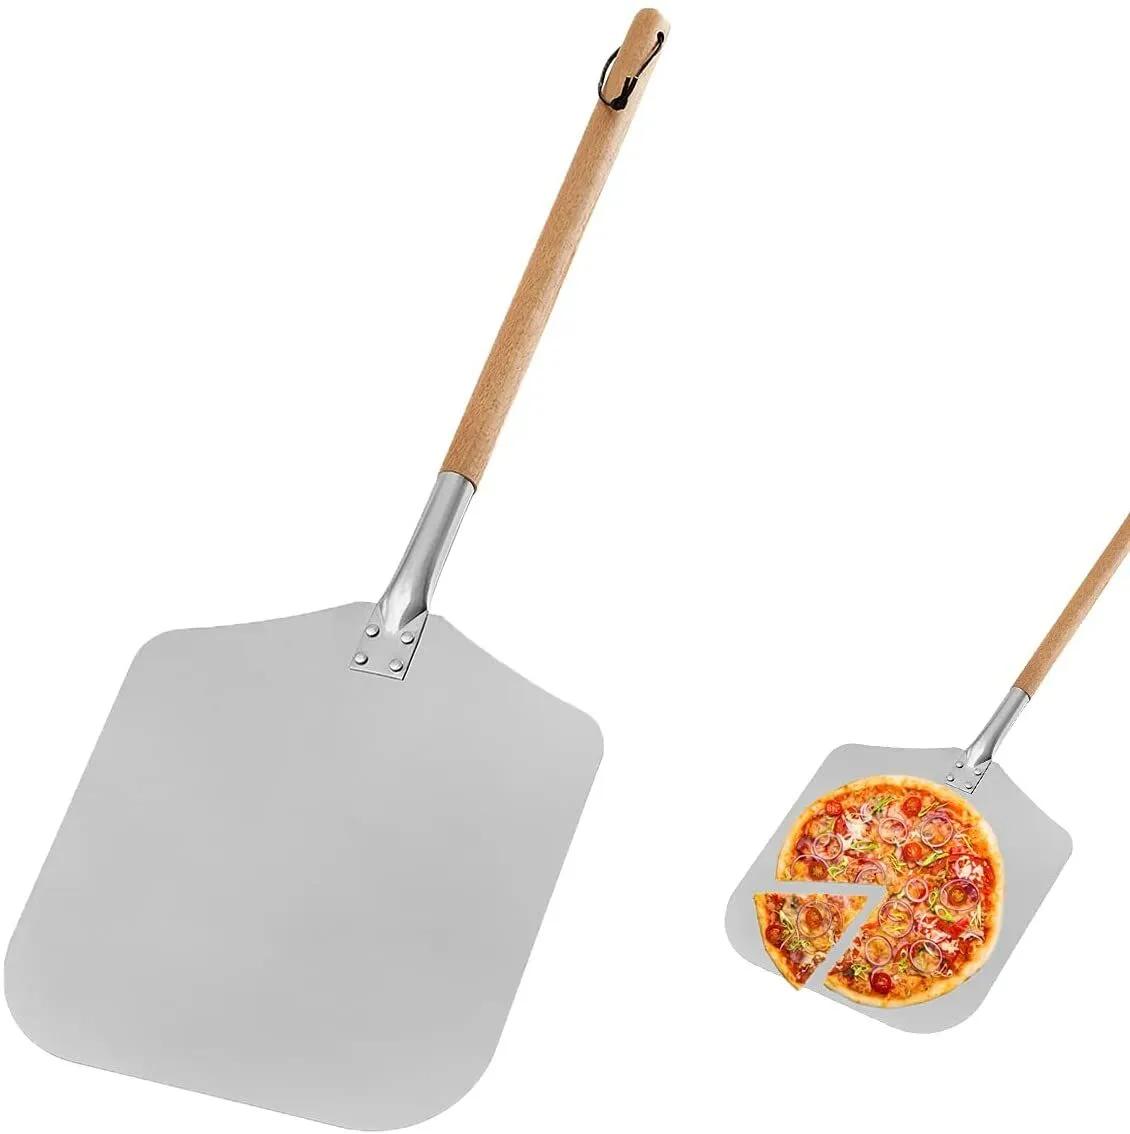 pizza oven peel paddle - Is a pizza paddle the same as a pizza peel